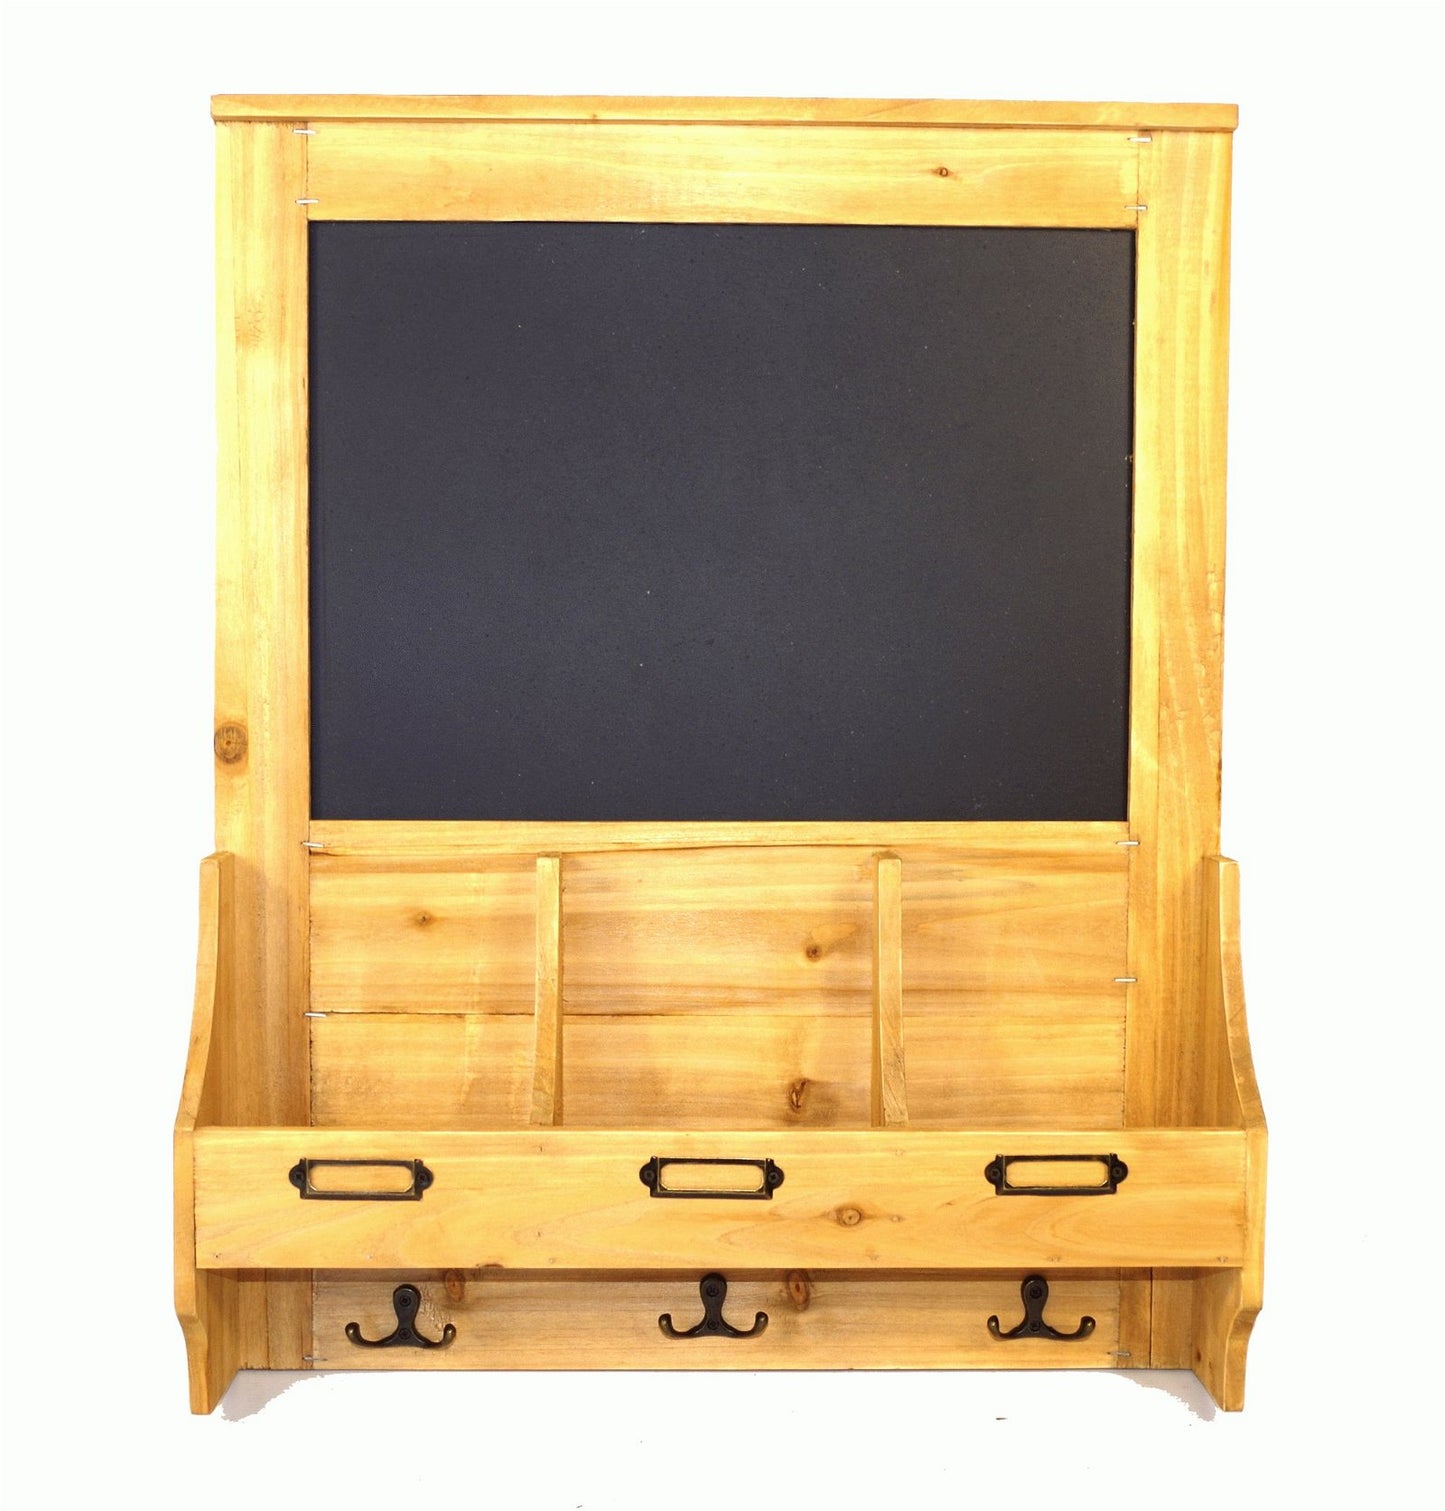 Chalkboard with hooks and Post Space 47 x 10 x 59cm - Kaftan direct